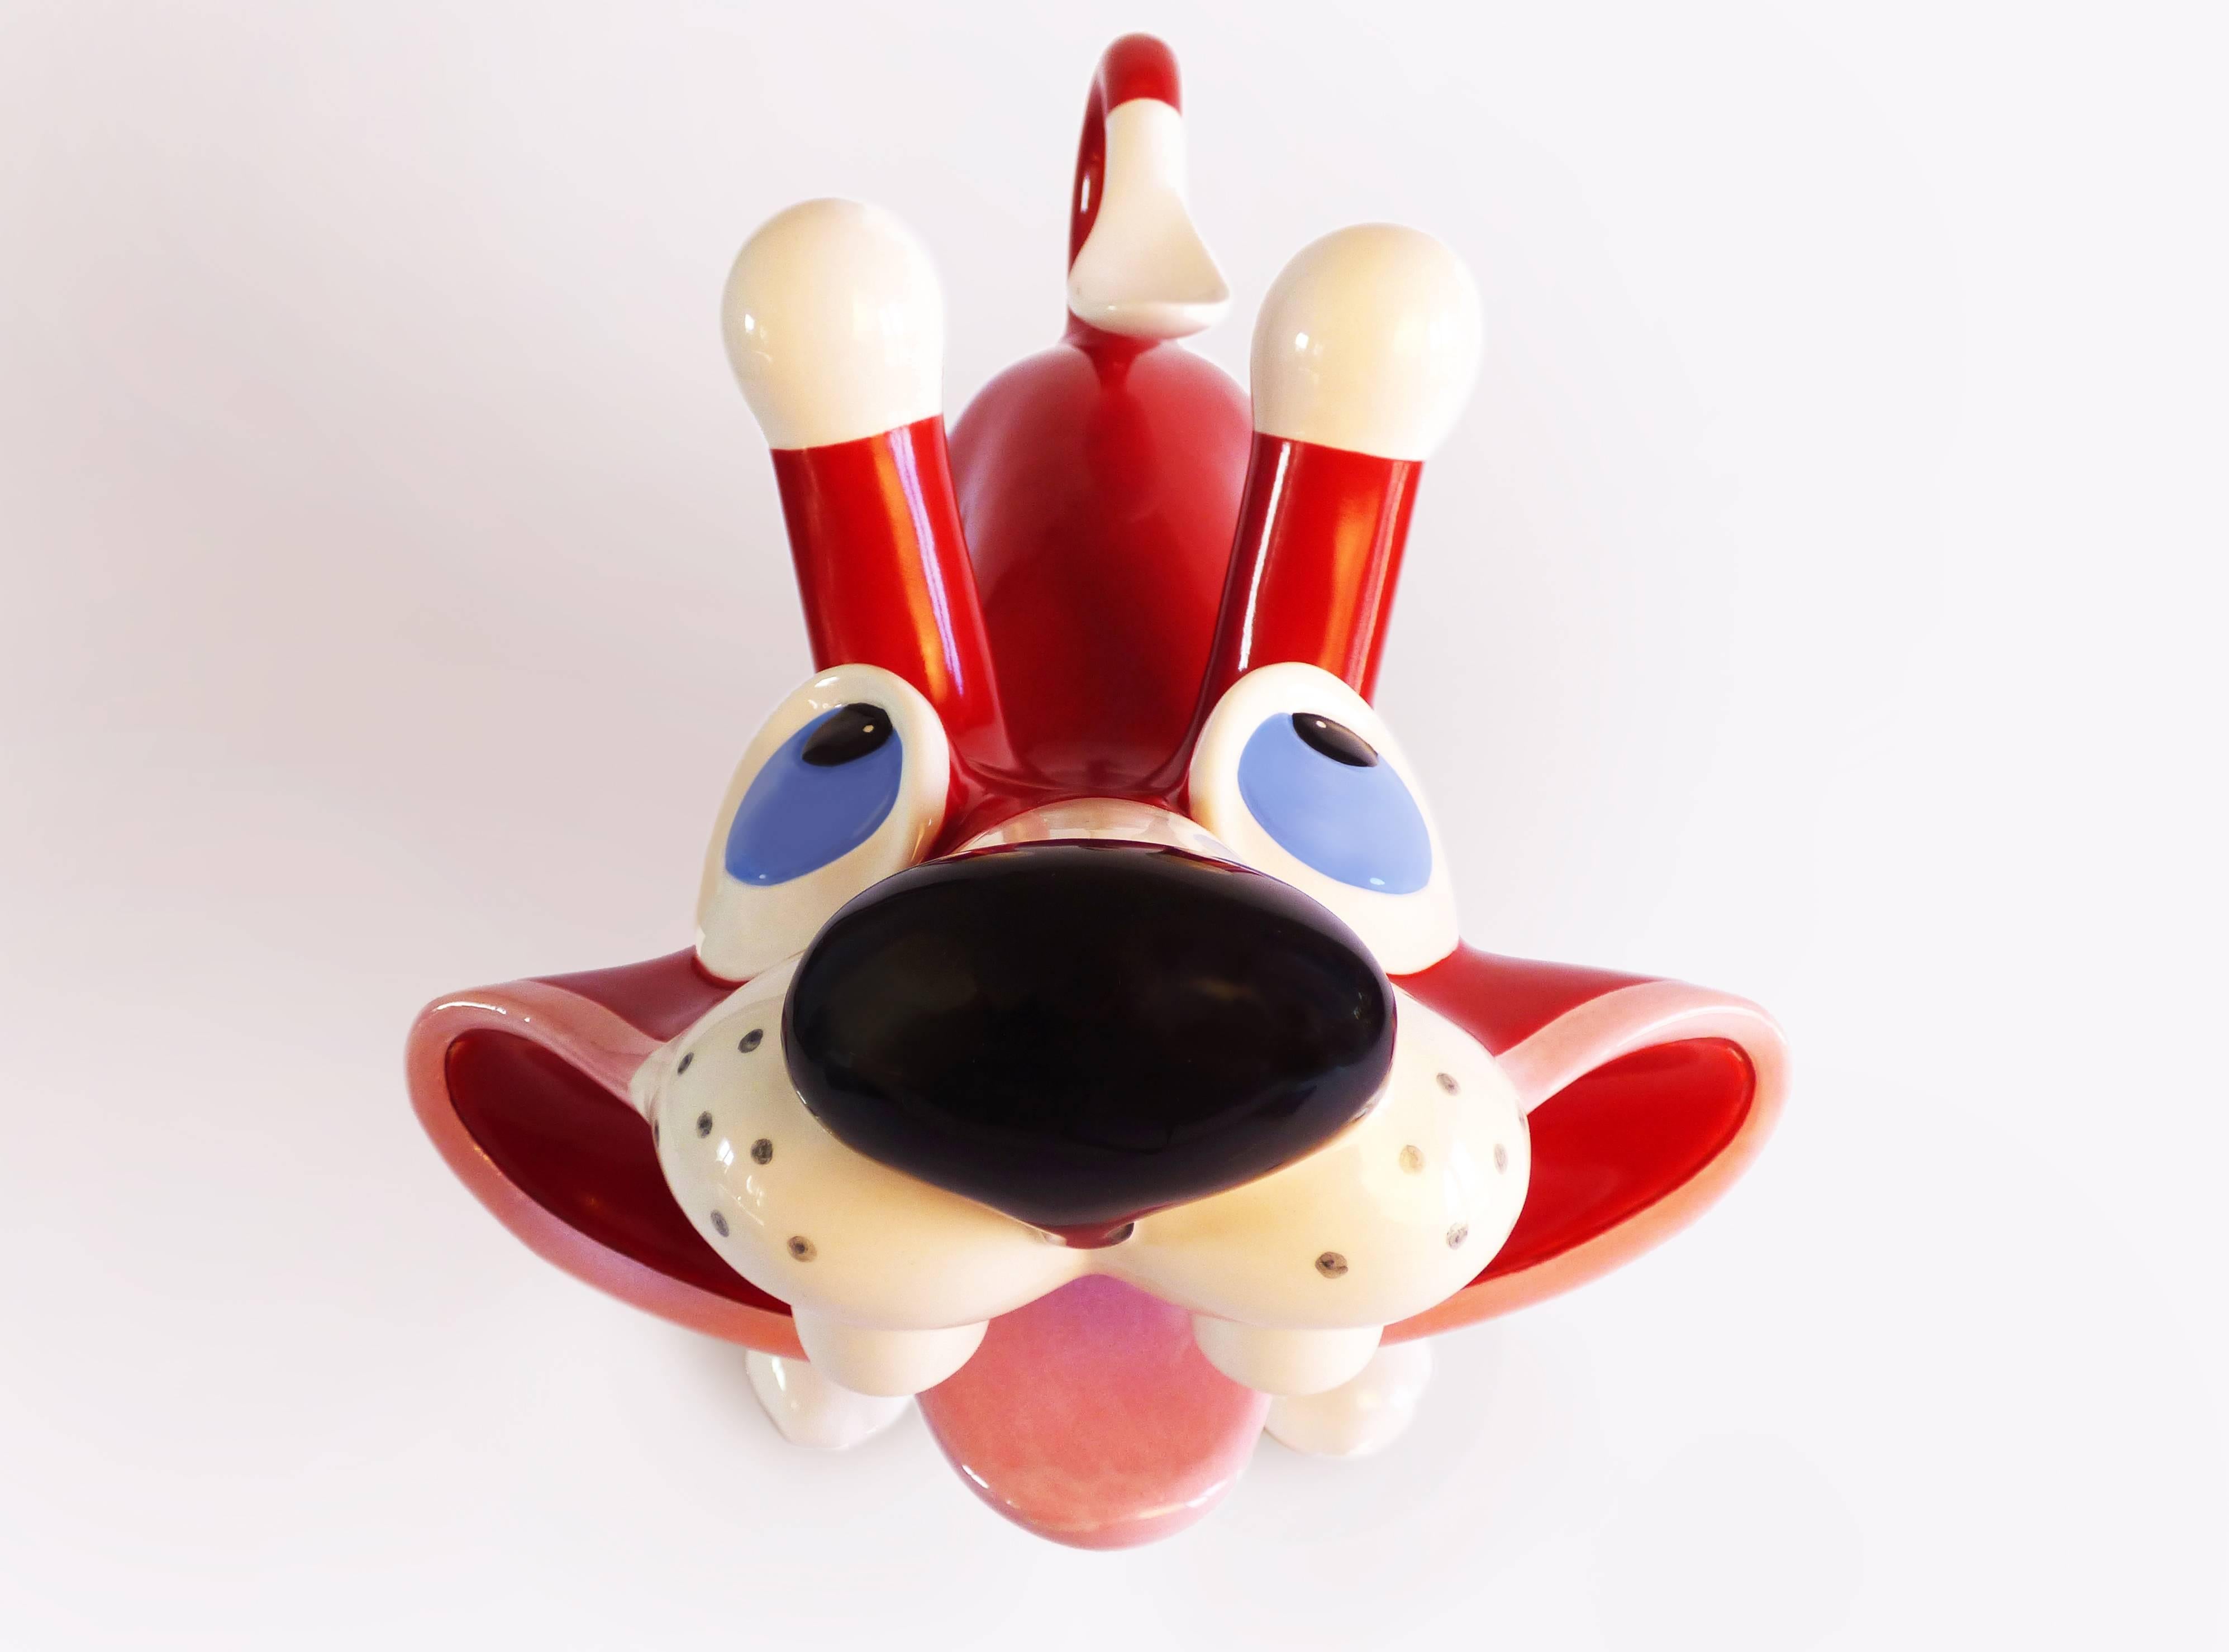 Enameled Masocane Ceramic Sculpture by Massimo Giacon for Superego Editions, Italy For Sale